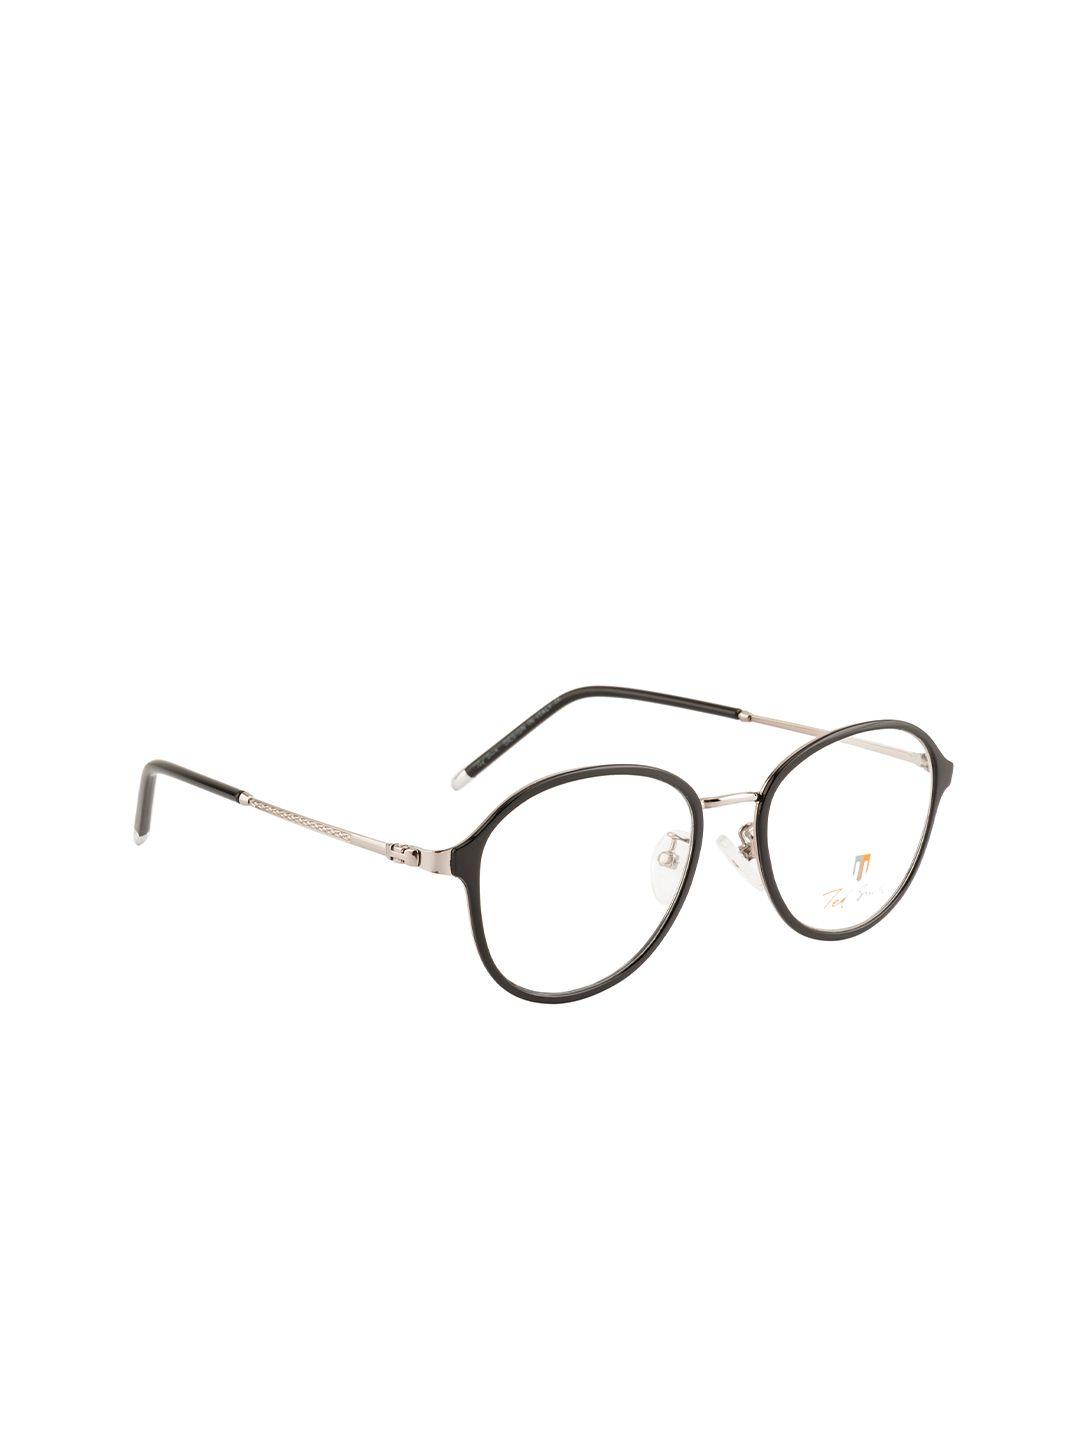 ted smith unisex silver-toned & black full rim round frames